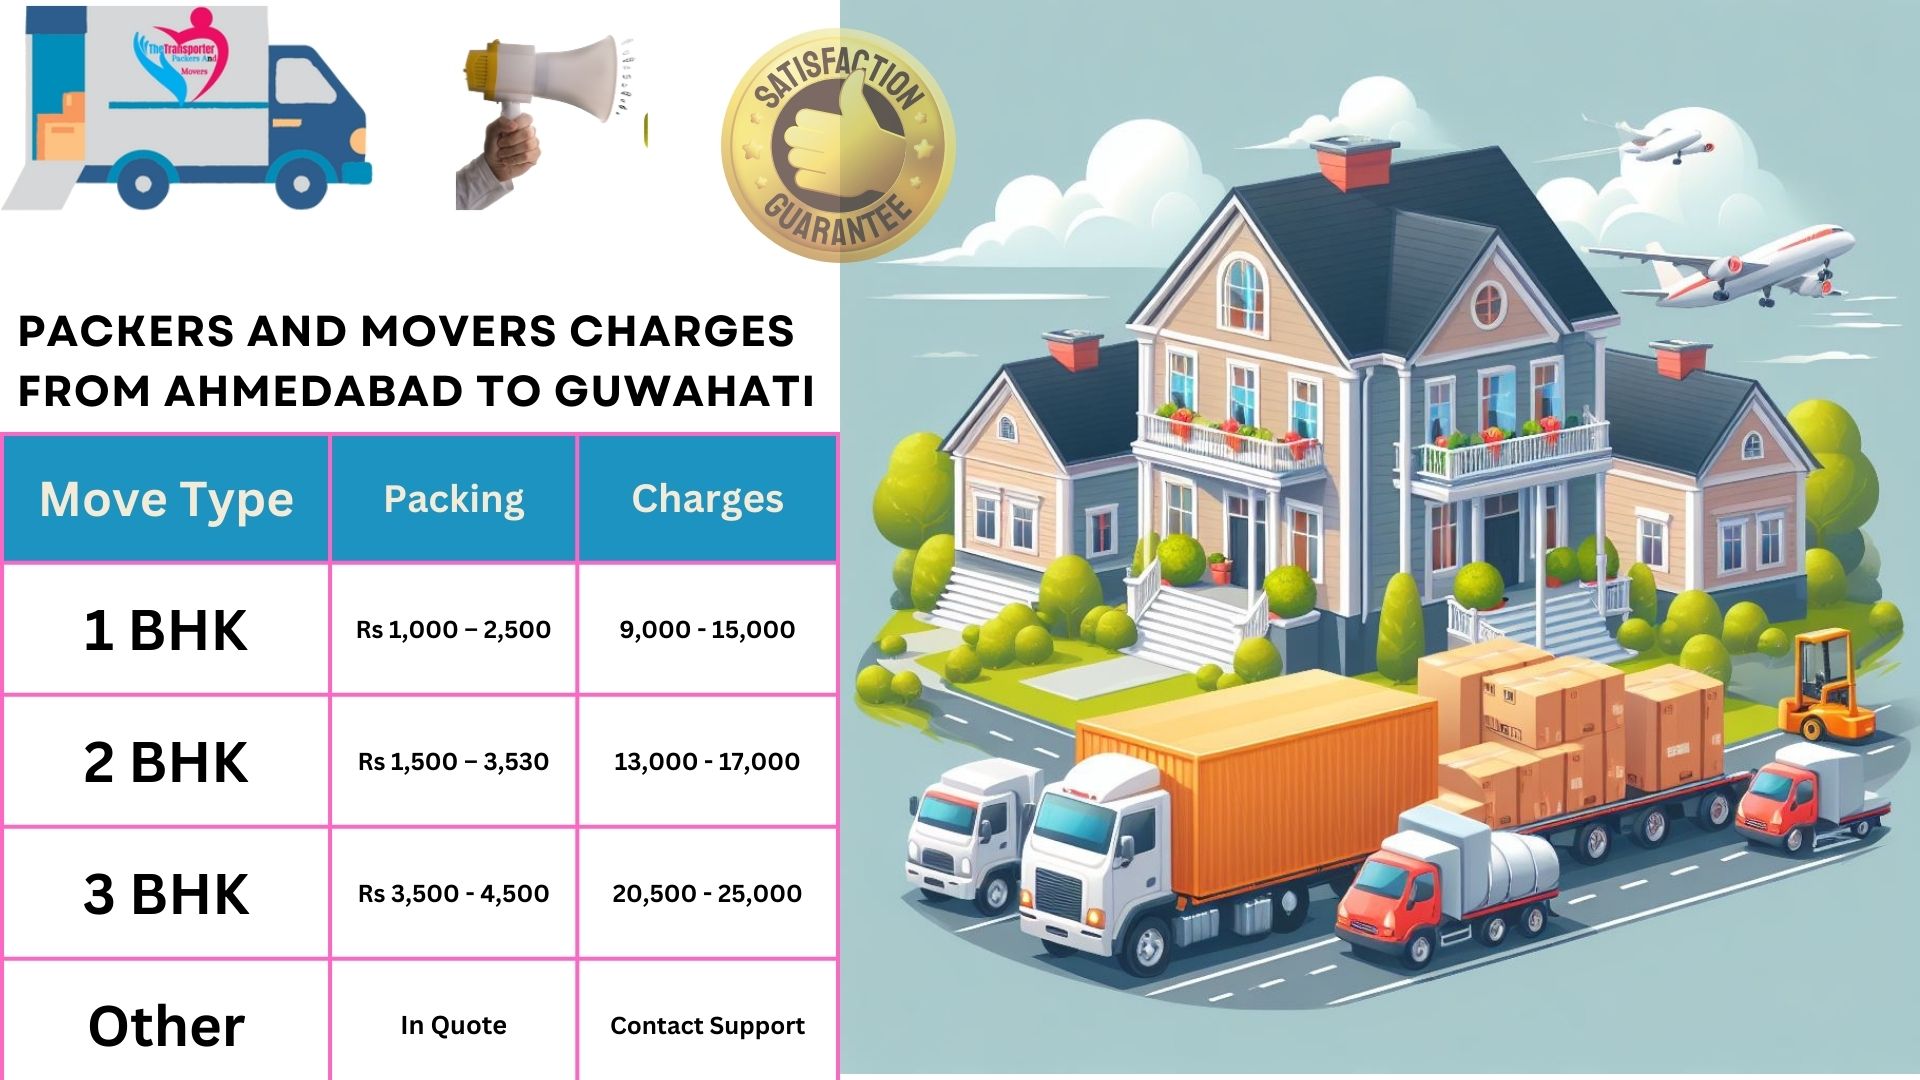 Your household goods shifting from Ahmedabad to Guwahati